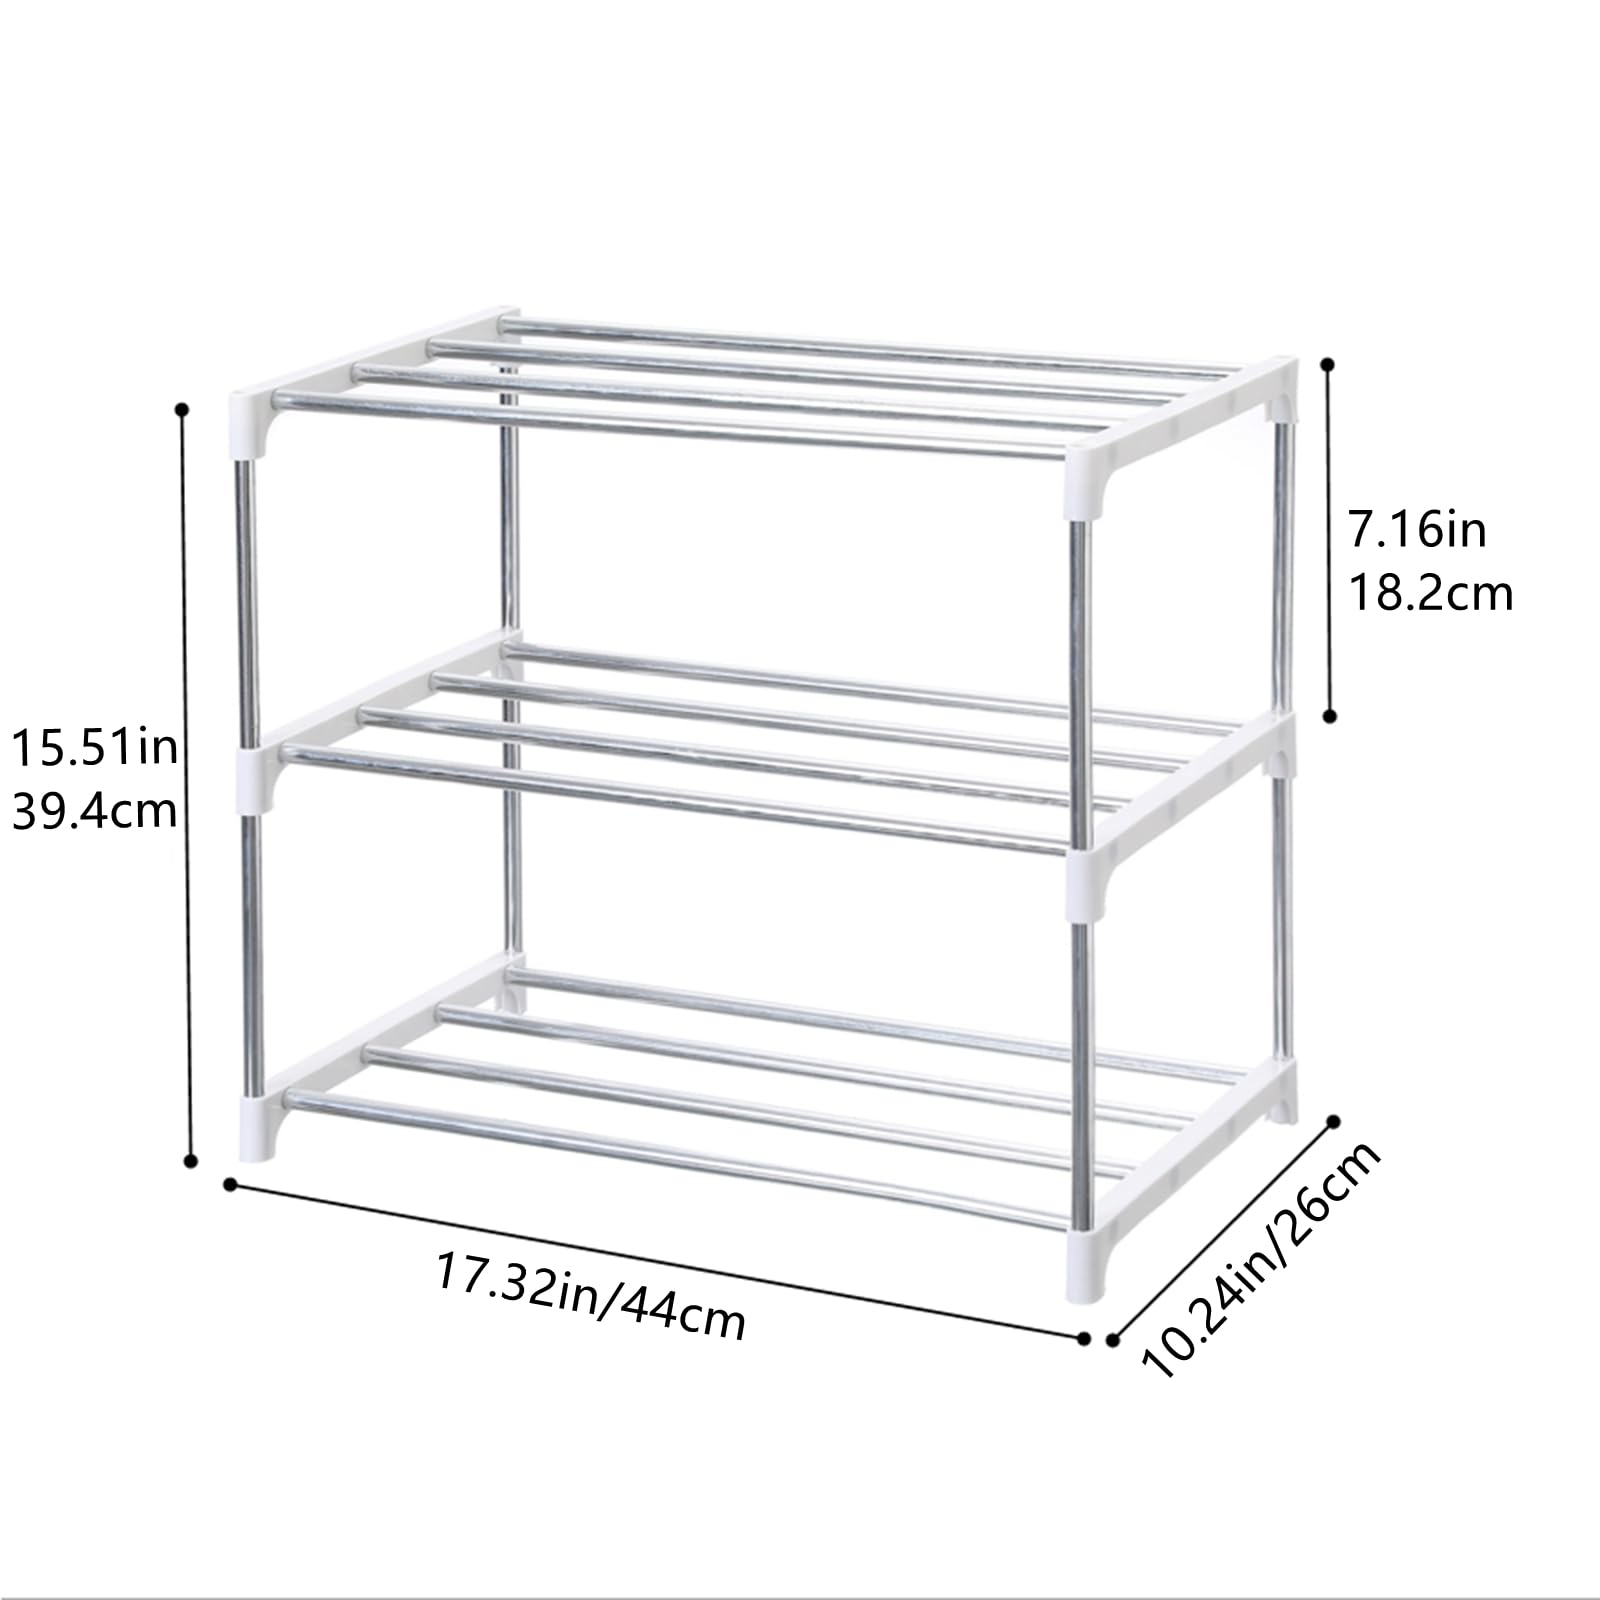 Jucaifu Stackable Small Shoe Rack, Entryway, Hallway and Closet Space Saving Storage and Organization (3-Tier, White)